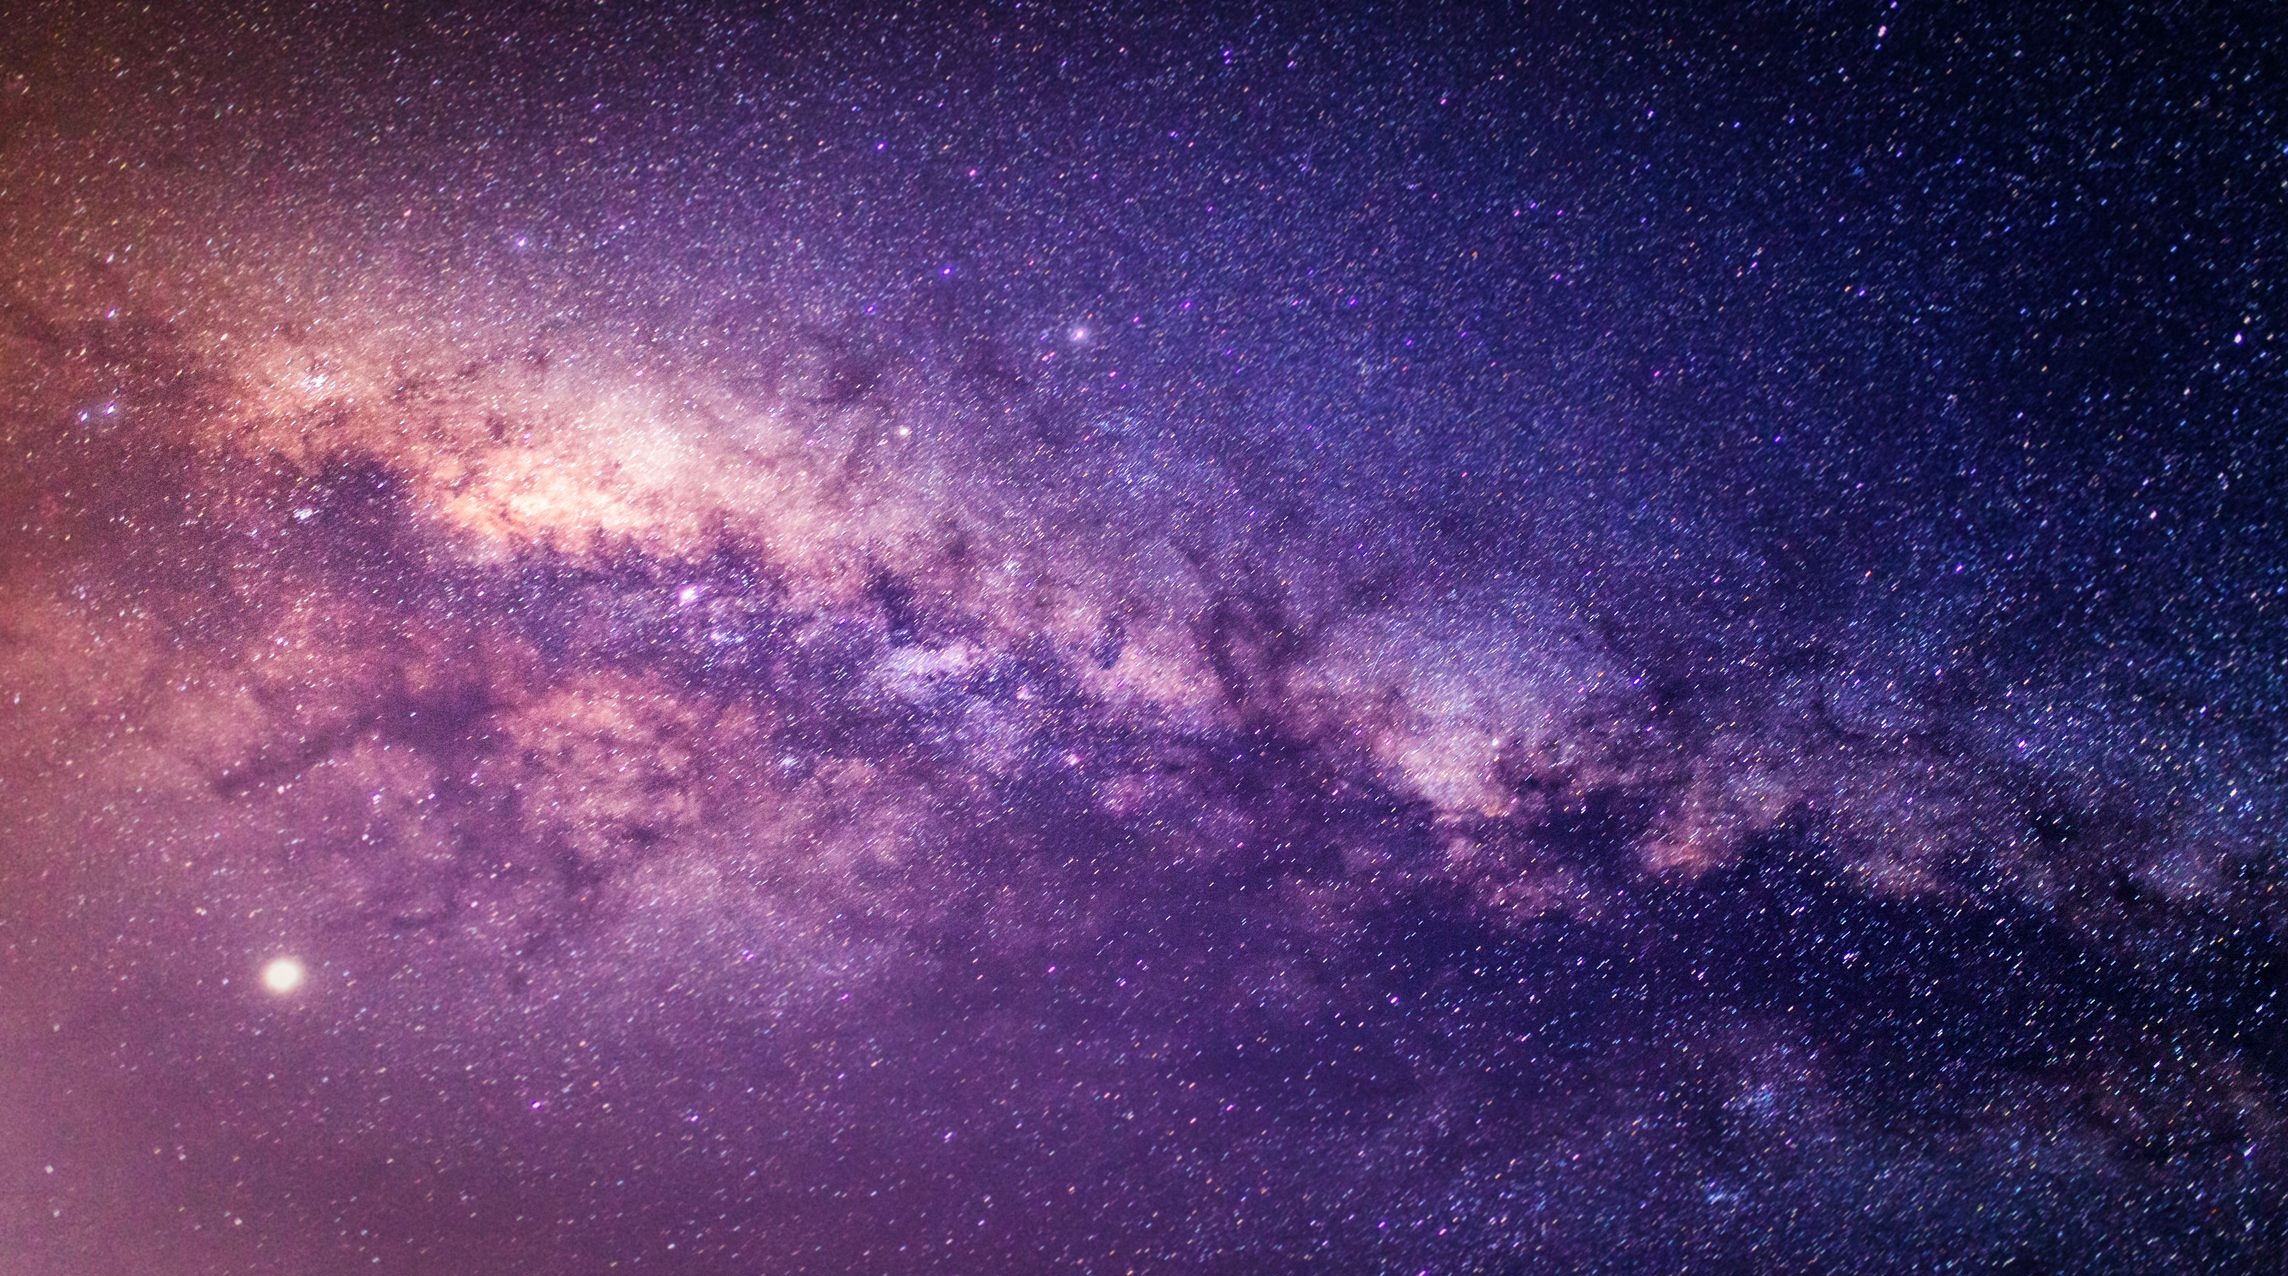 10 things you (probably) didn’t know about the Milky Way